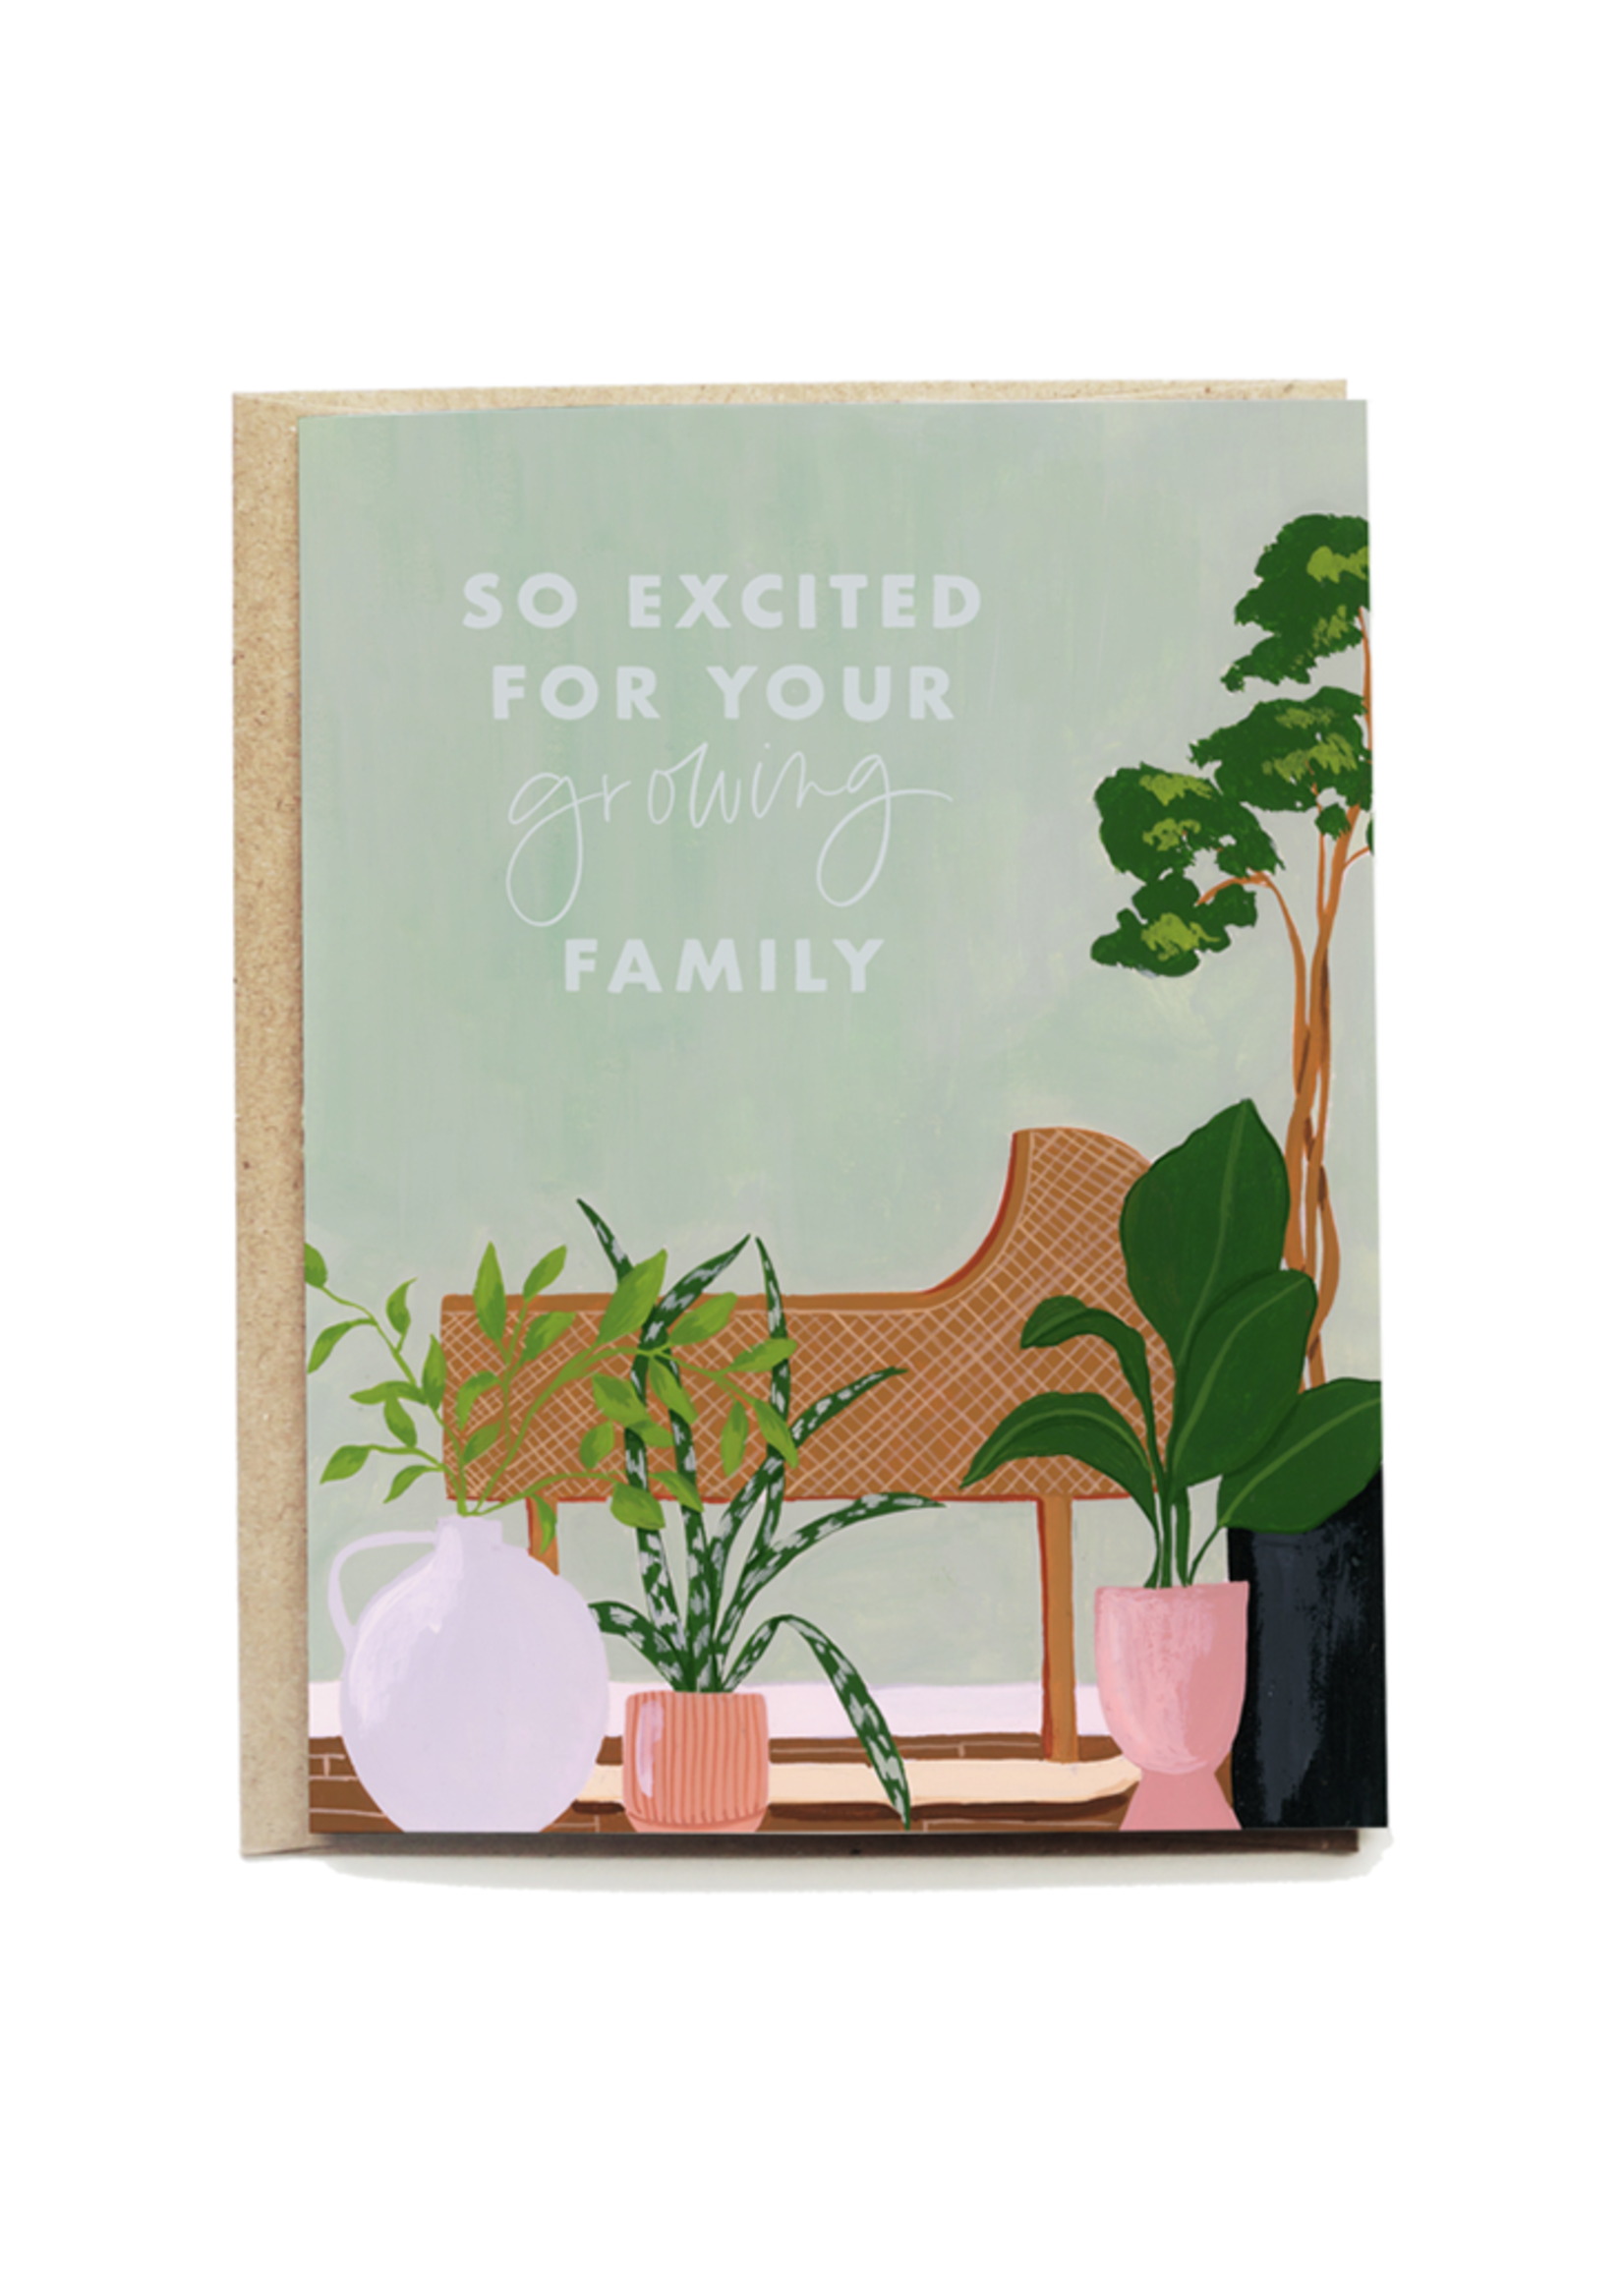 Growing Family Card